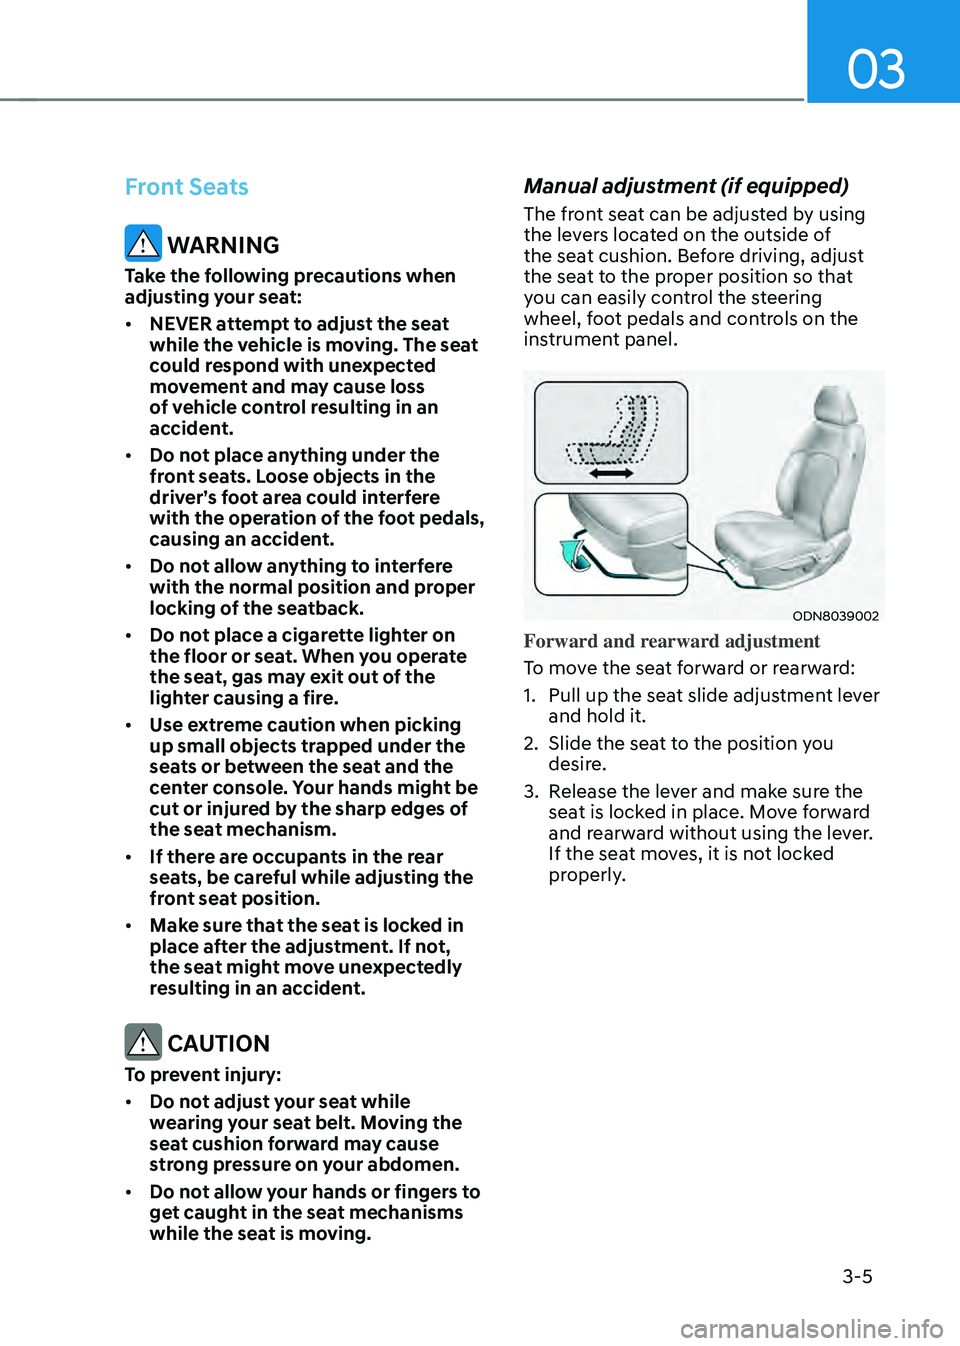 HYUNDAI SONATA HYBRID 2022  Owners Manual 03
3-5
Front Seats
 WARNING
Take the following precautions when 
adjusting your seat:
•	NEVER attempt to adjust the seat 
while the vehicle is moving. The seat 
could respond with unexpected 
moveme